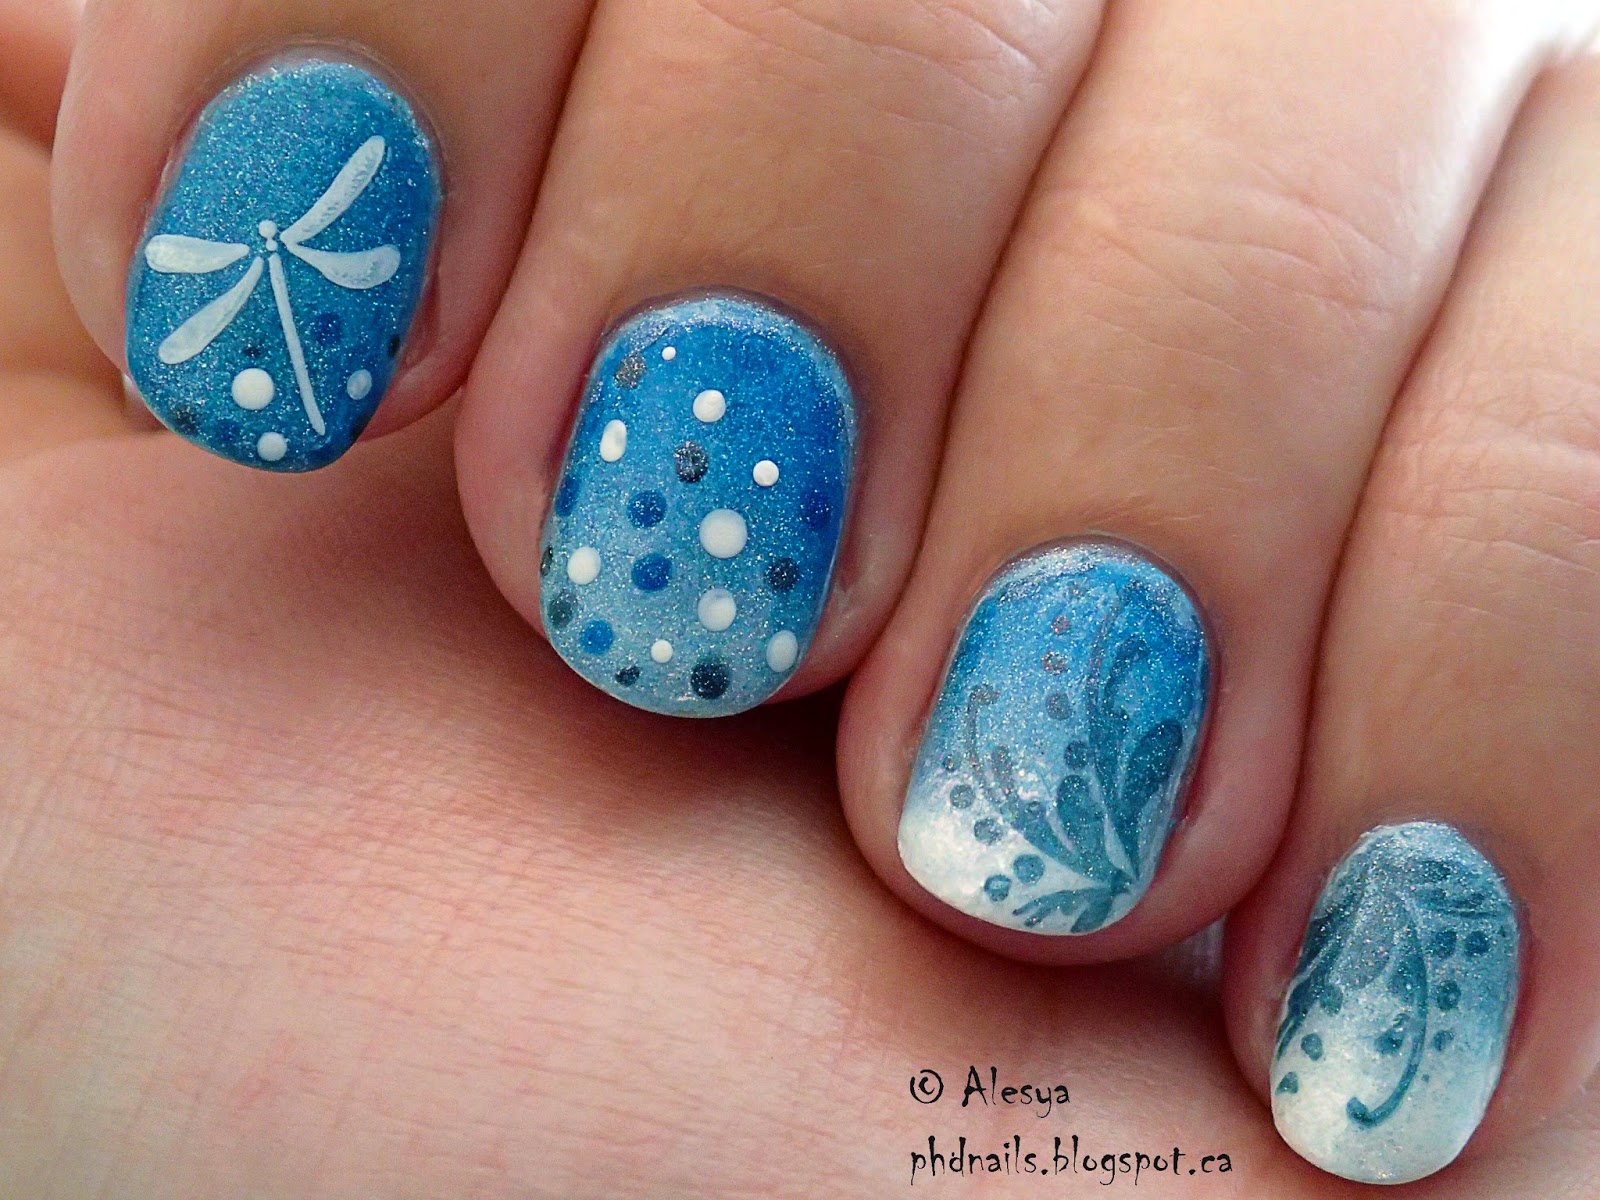 7. "Nail Art Challenge: Compete in Nail Design Contests" - wide 1